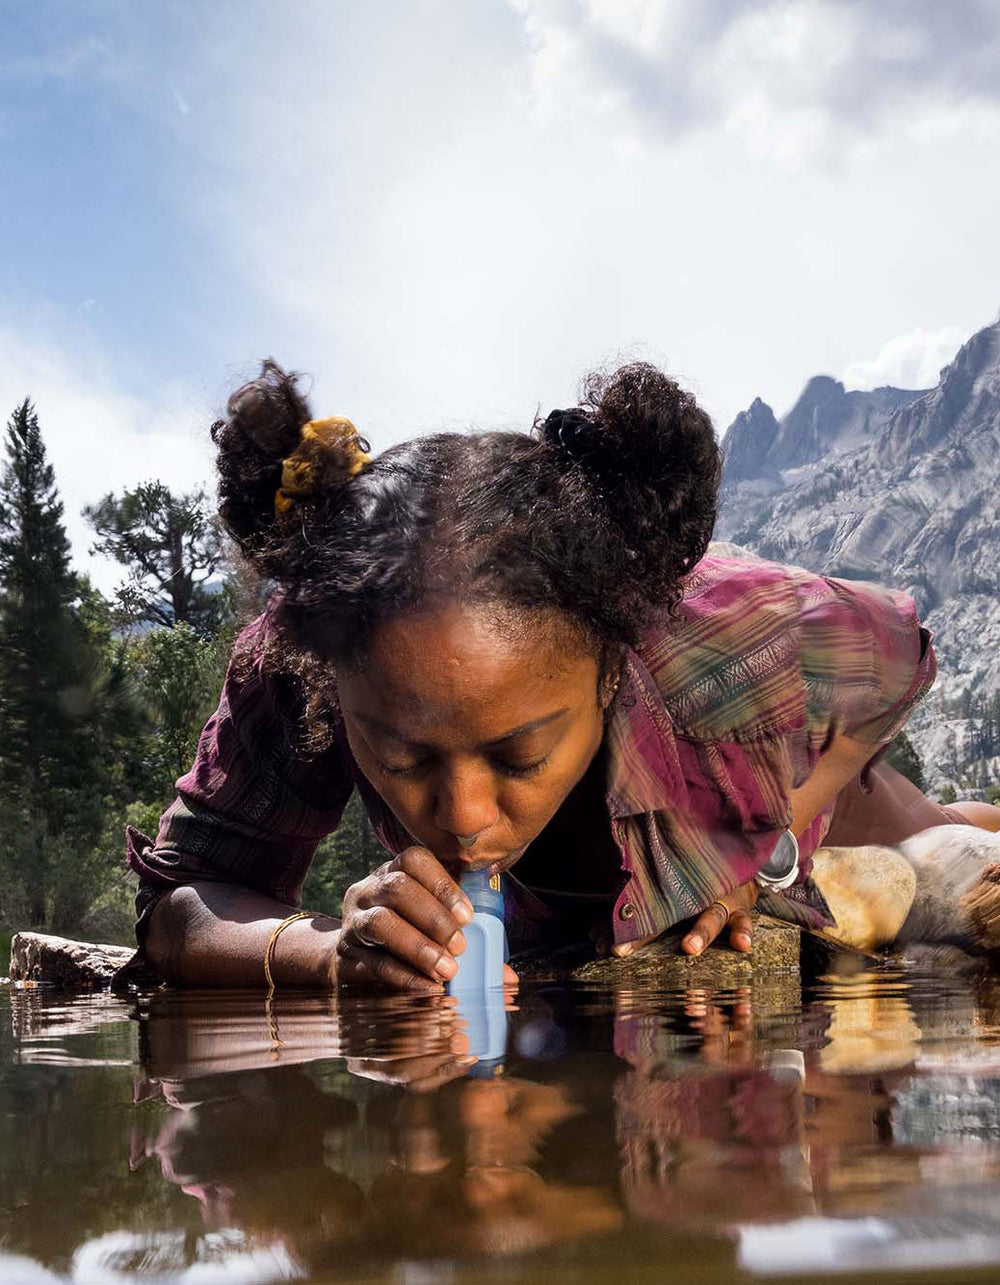 LifeStraw Personal Water Filter 4-pack on sale during Memorial Day we